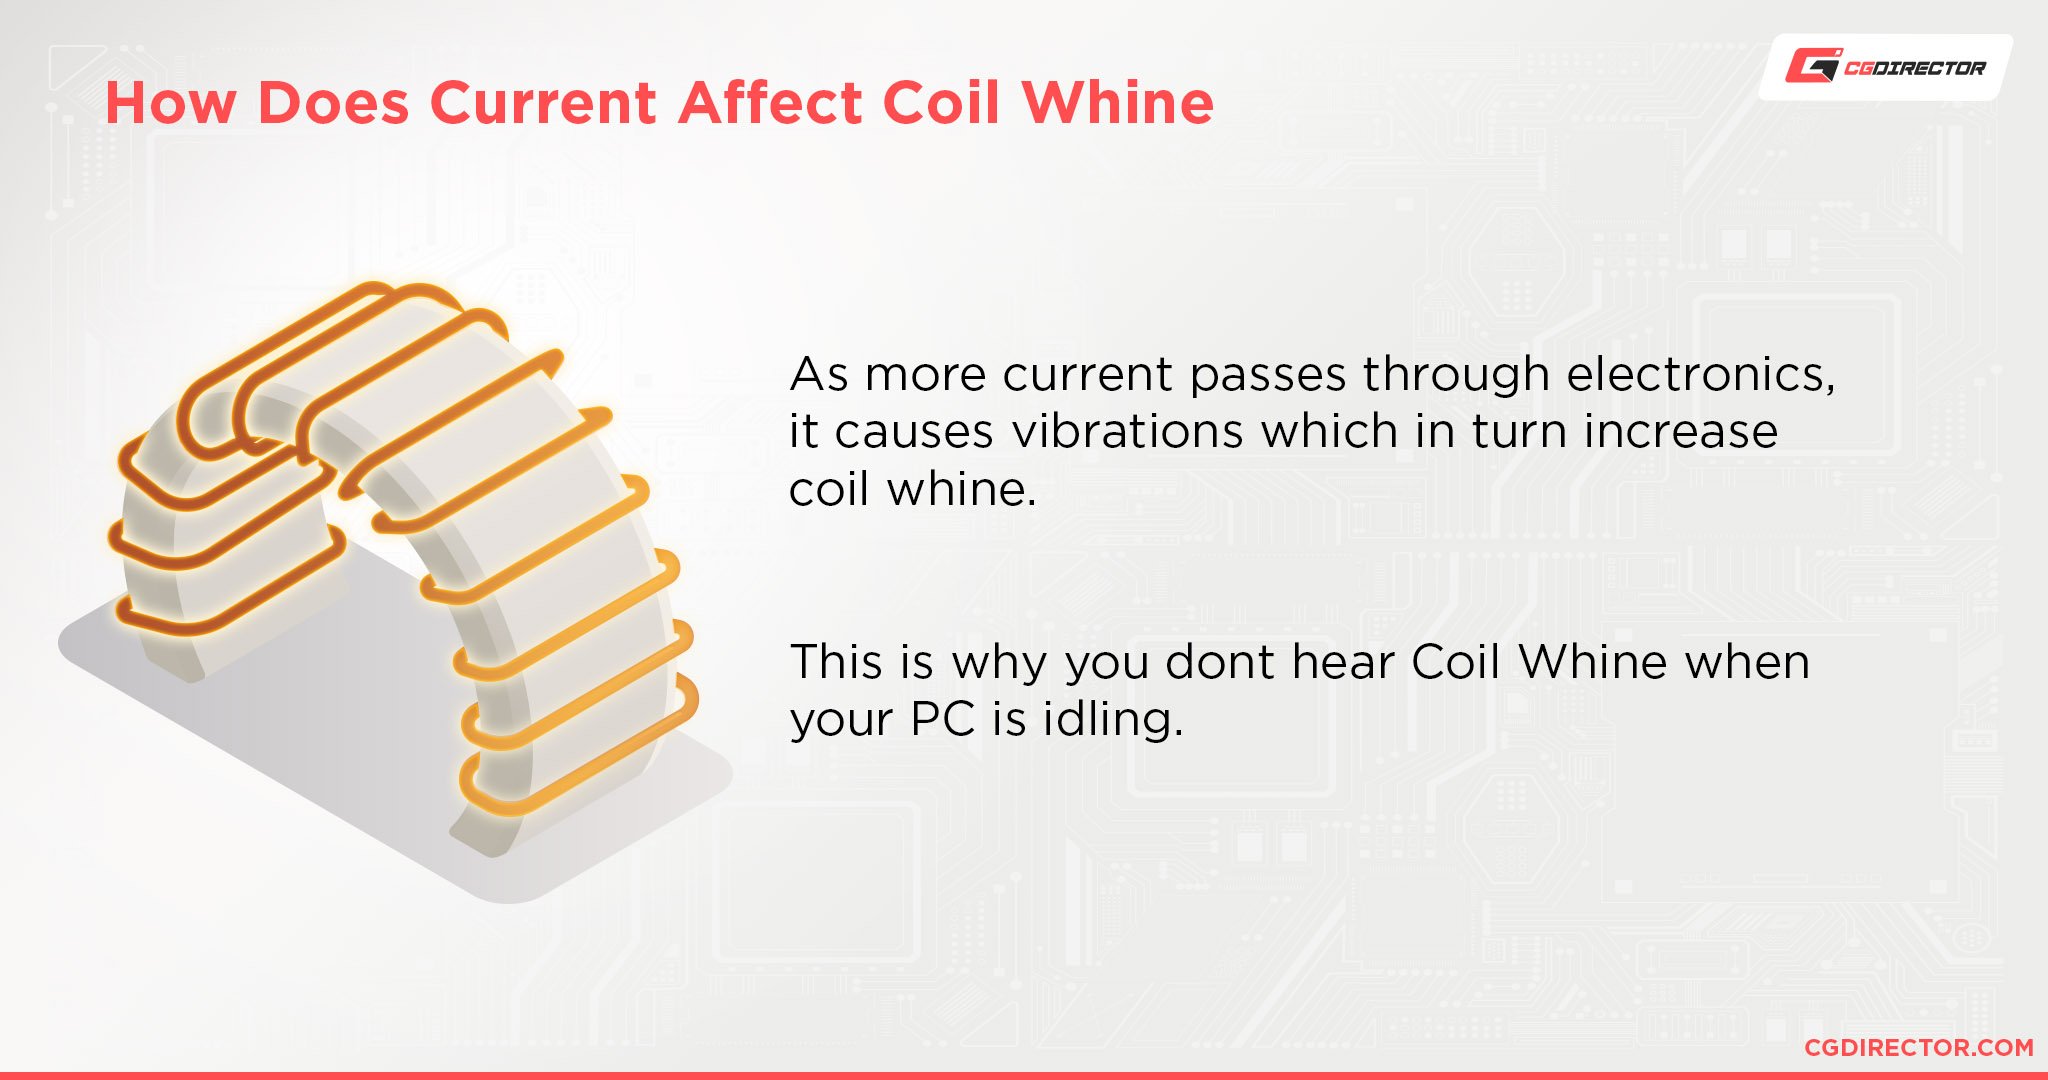 How Does Current Affect Coil Whine